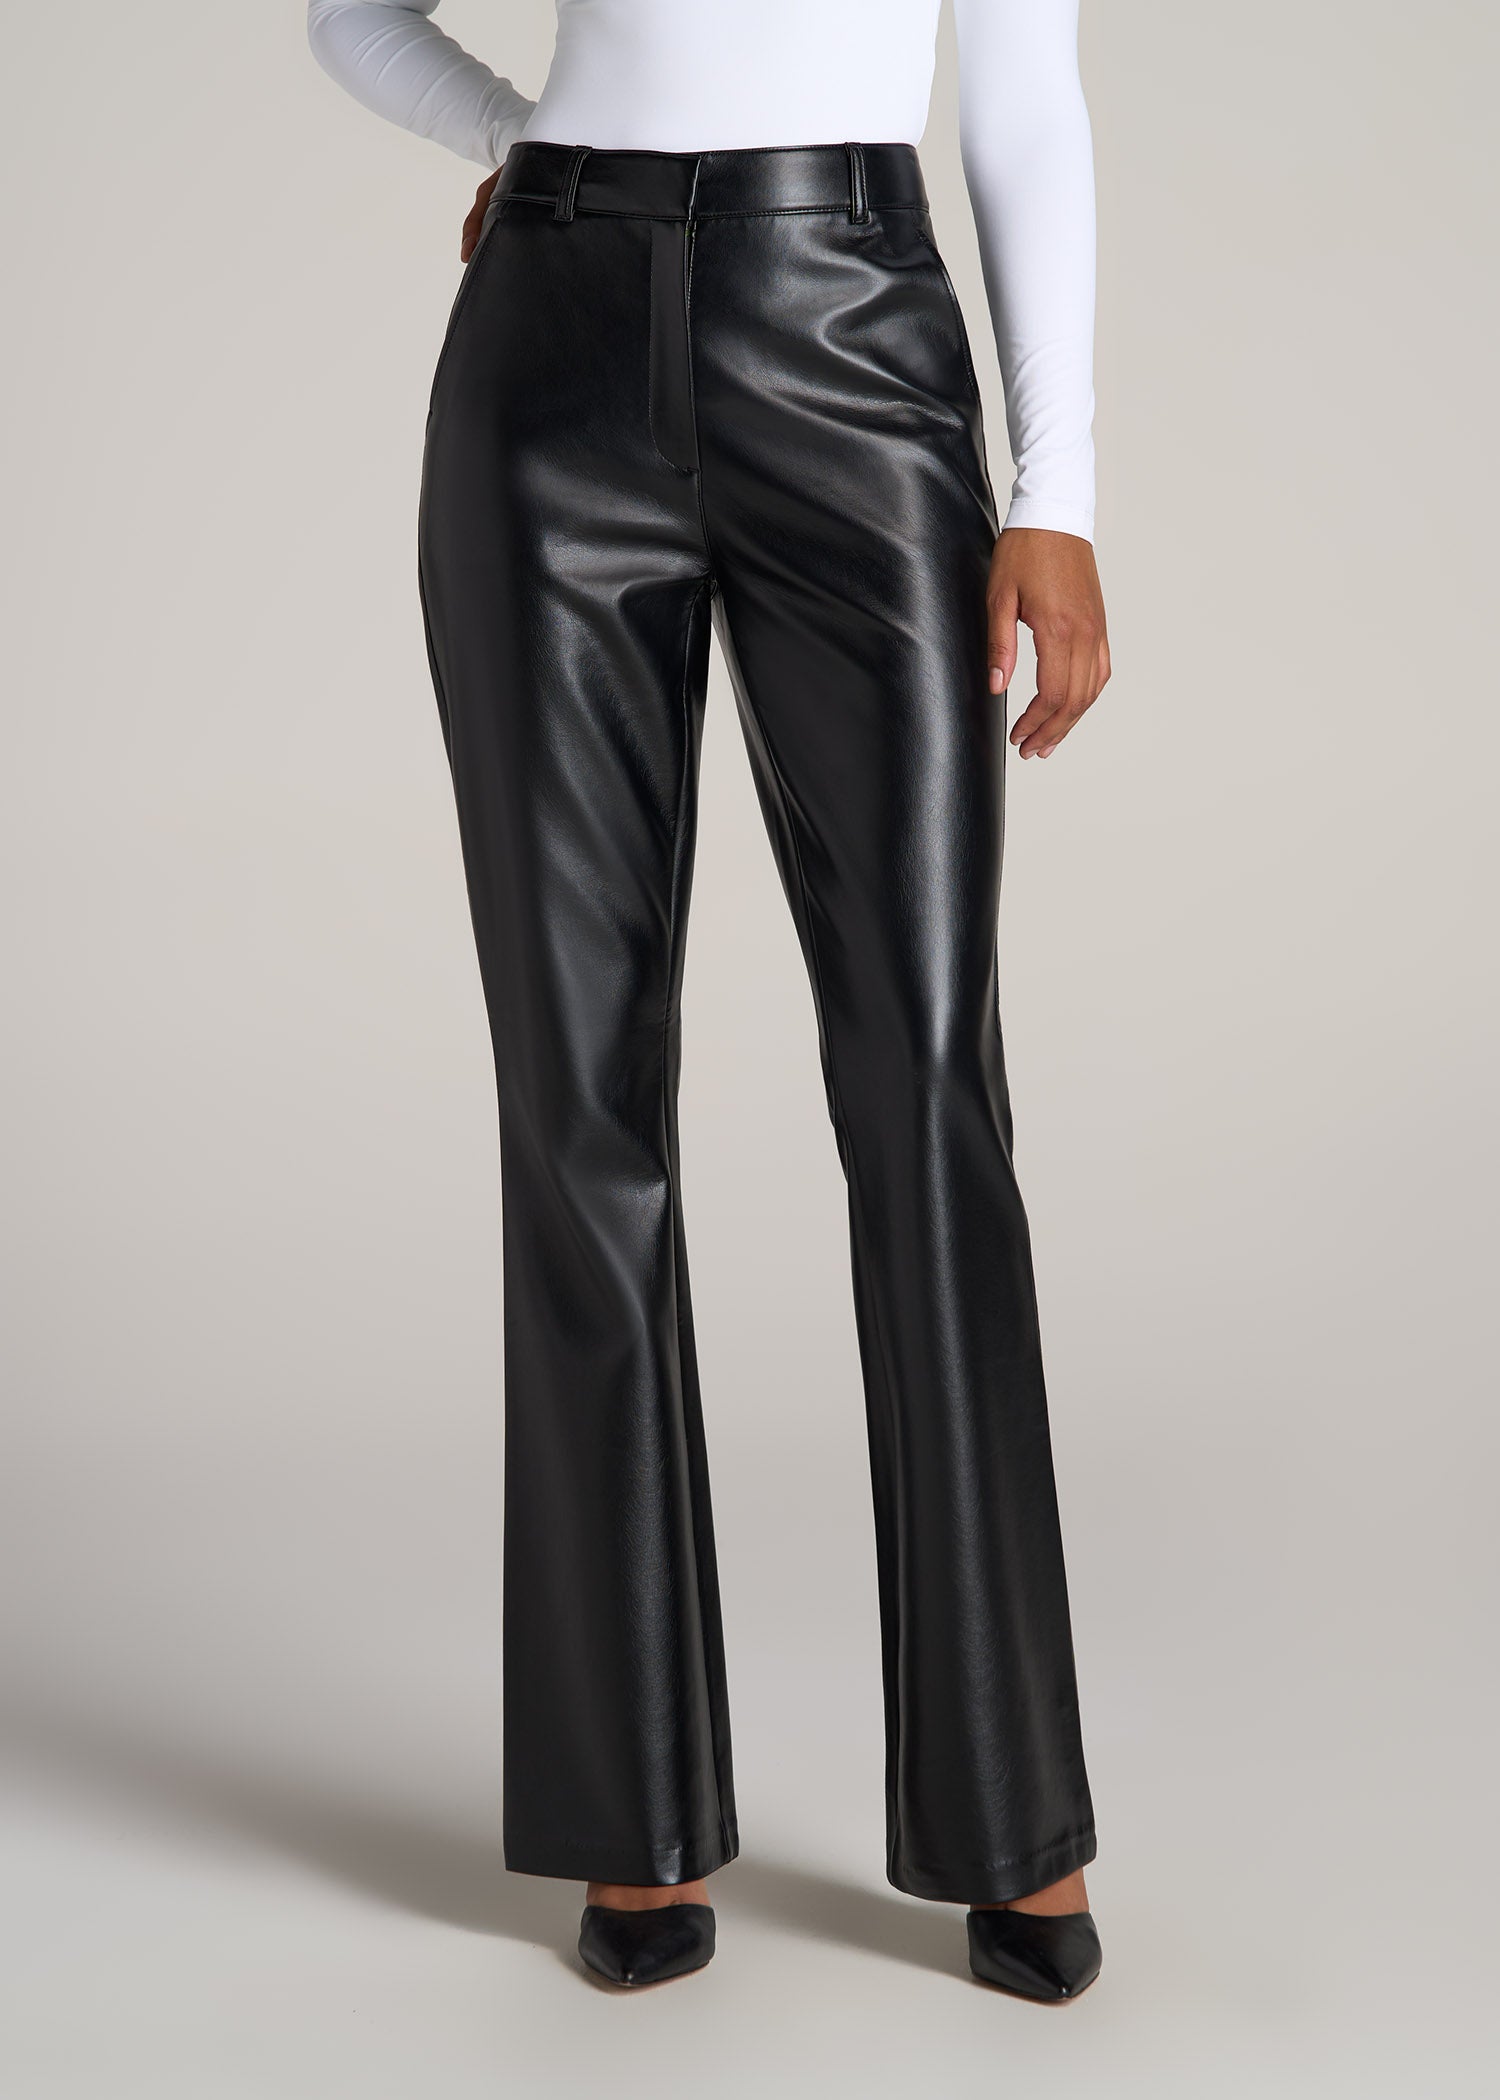 Leather Pants, Flare & High Waisted Leather Pants